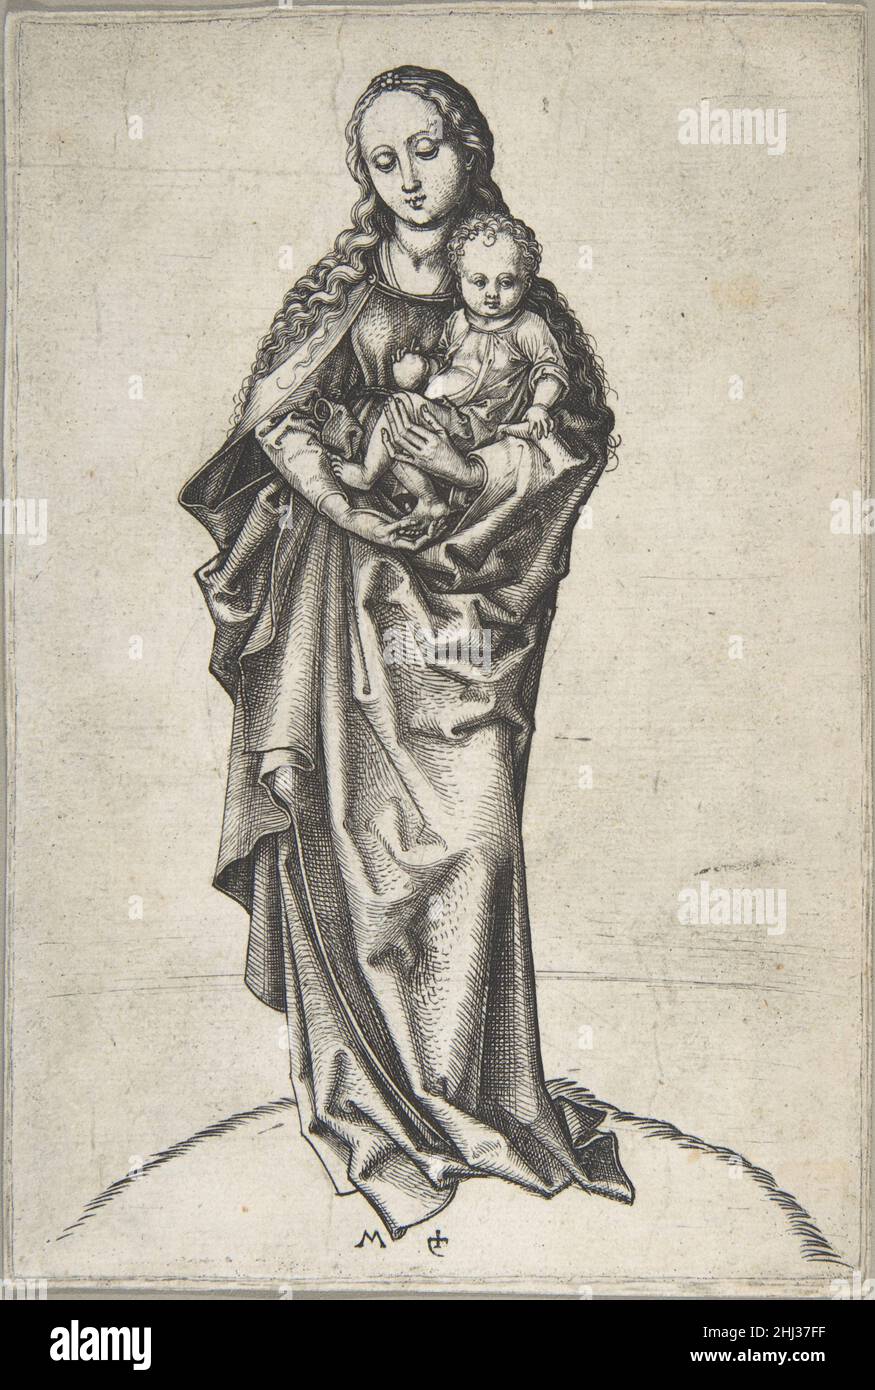 Virgin and Child with an Apple ca. 1475 Martin Schongauer German. Virgin and Child with an Apple. Martin Schongauer (German, Colmar ca. 1435/50–1491 Breisach). ca. 1475. Engraving. Prints Stock Photo